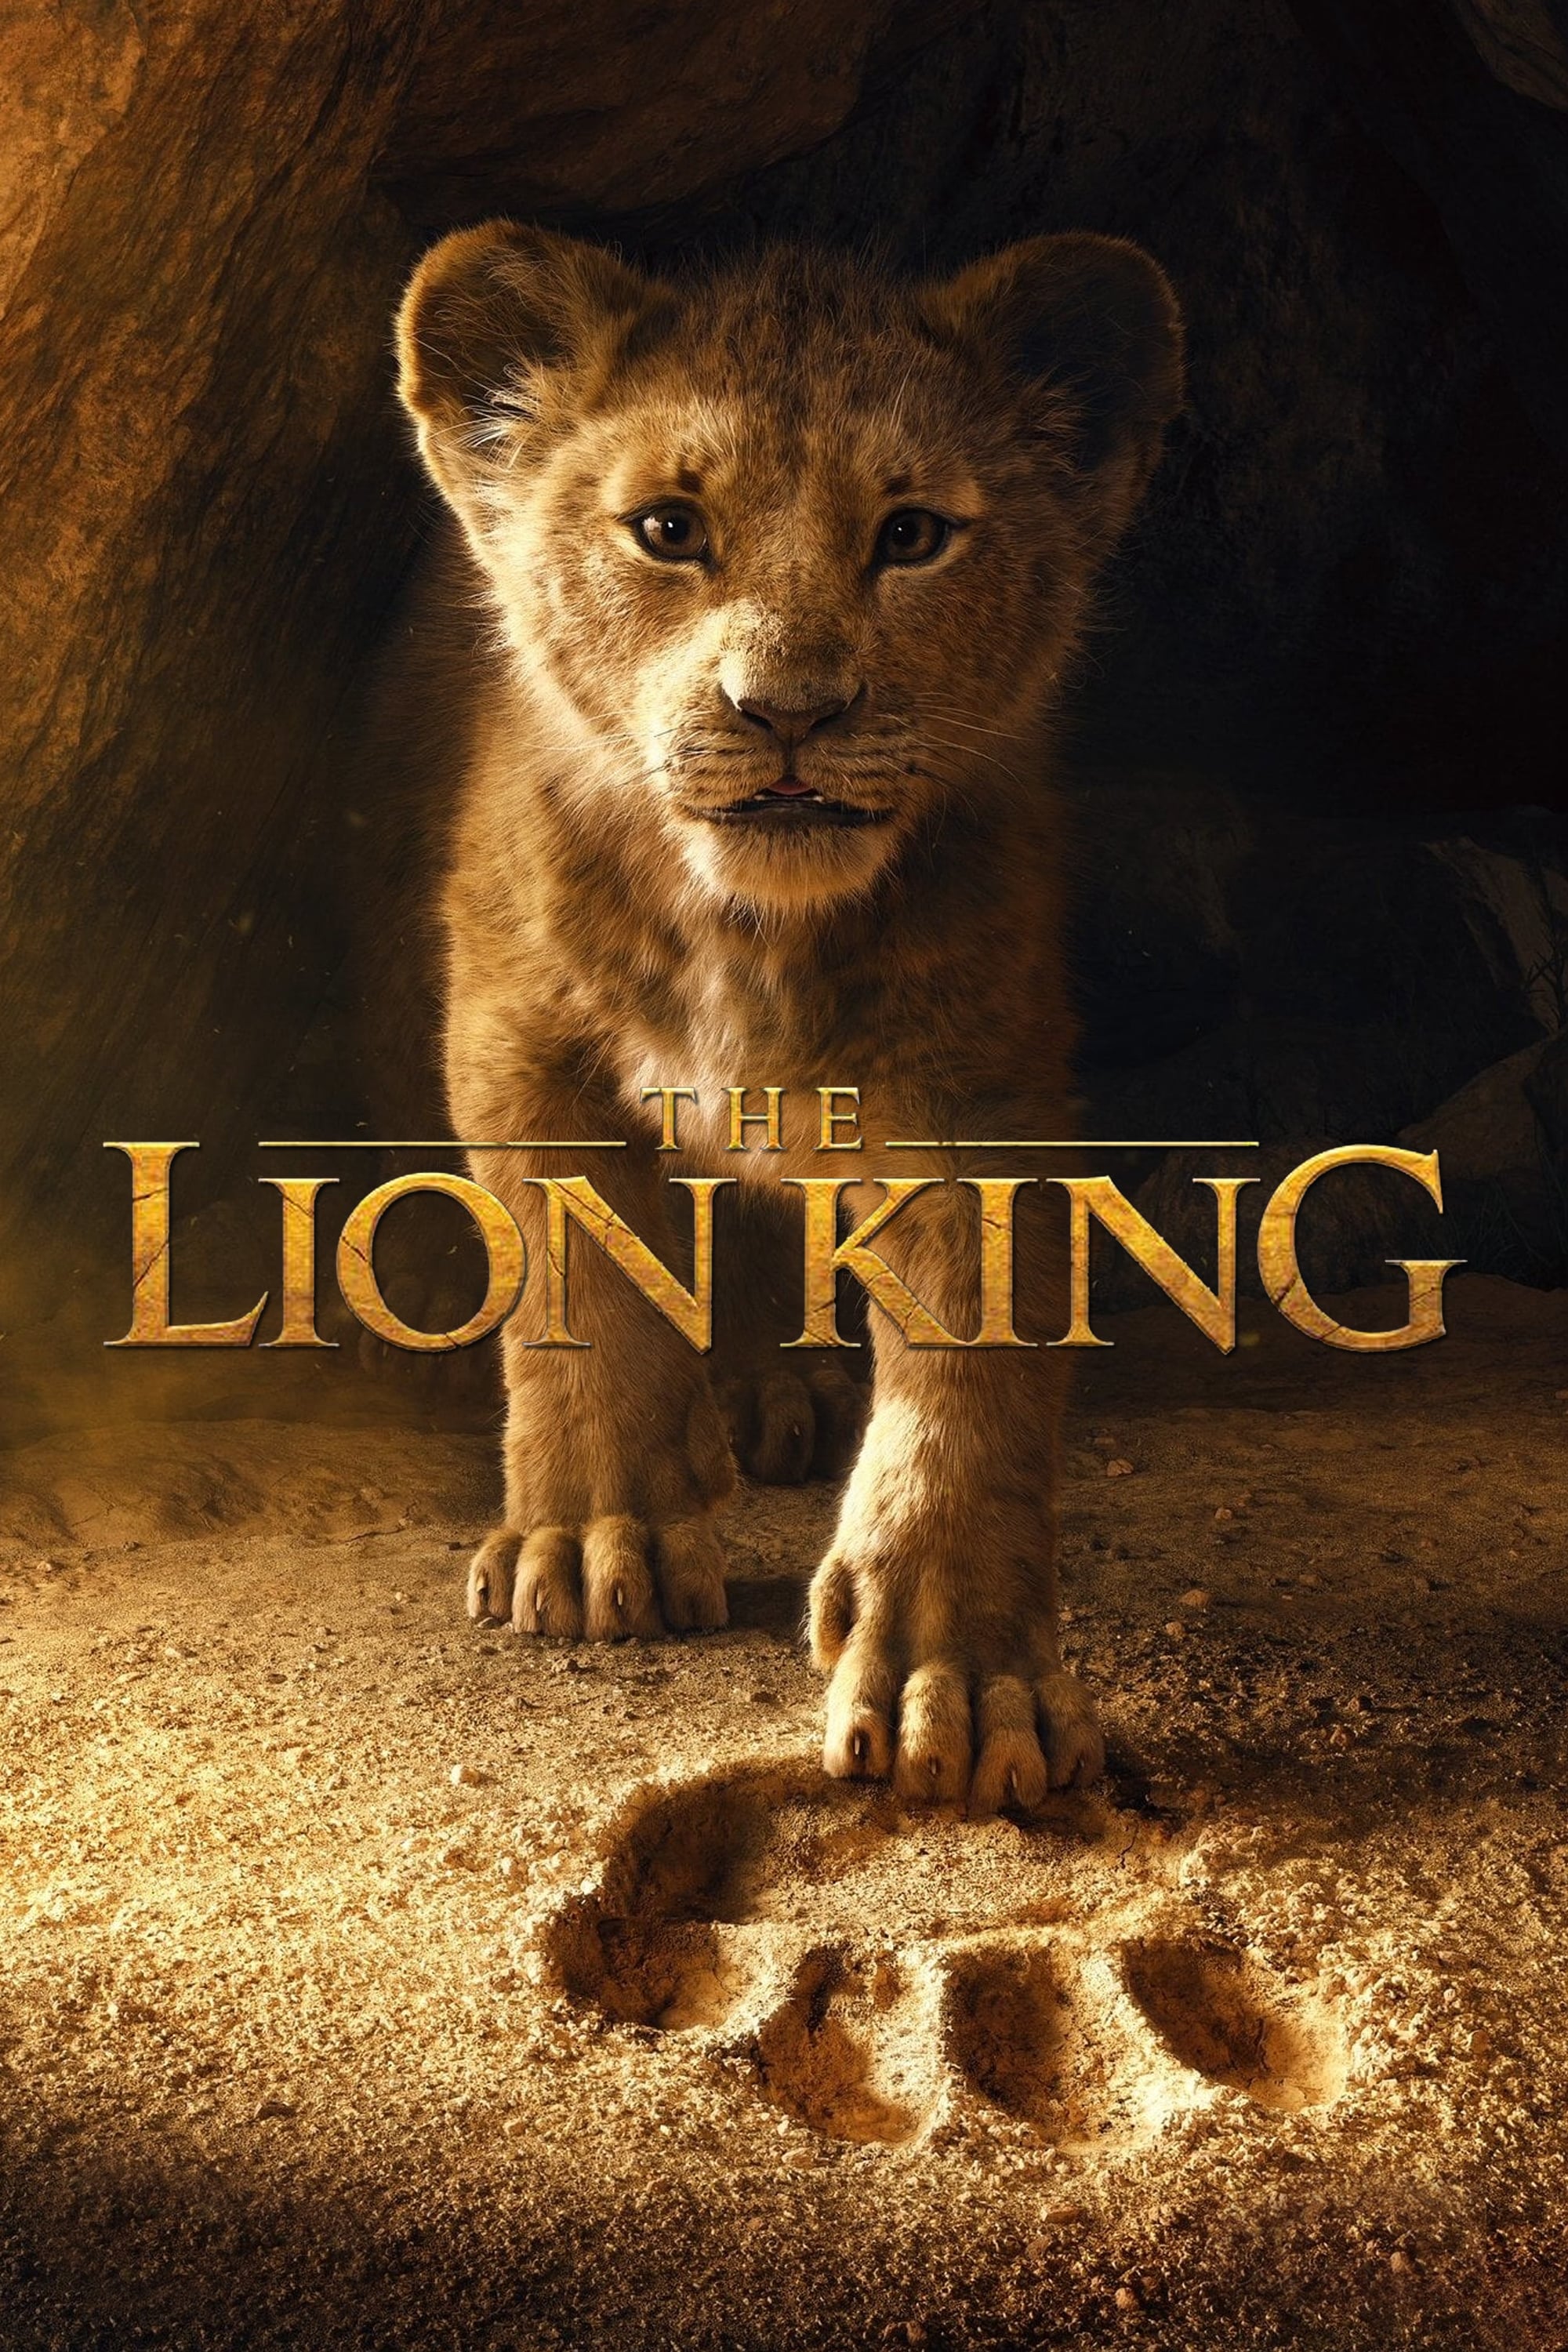 The Lion King (2019) Official Trailer #2